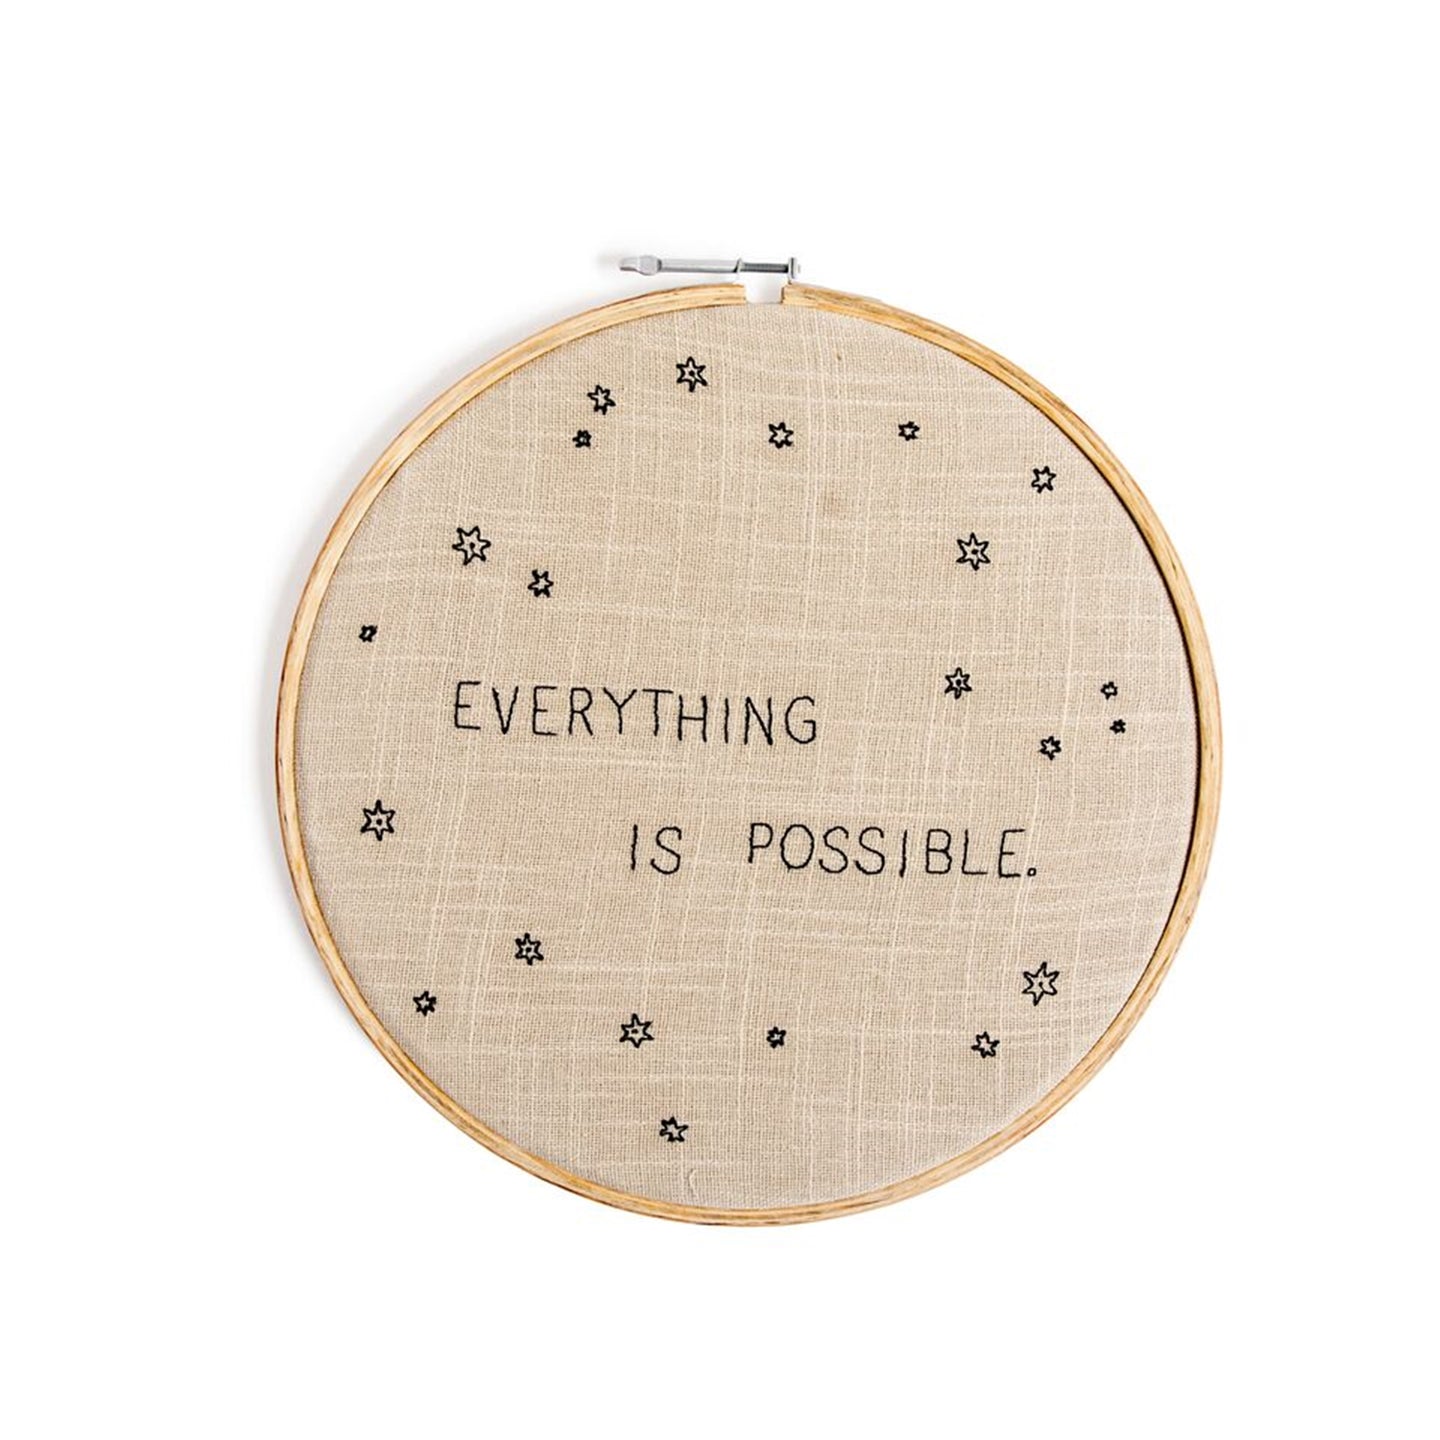 Embroidery Hoop Art - Everything is Possible